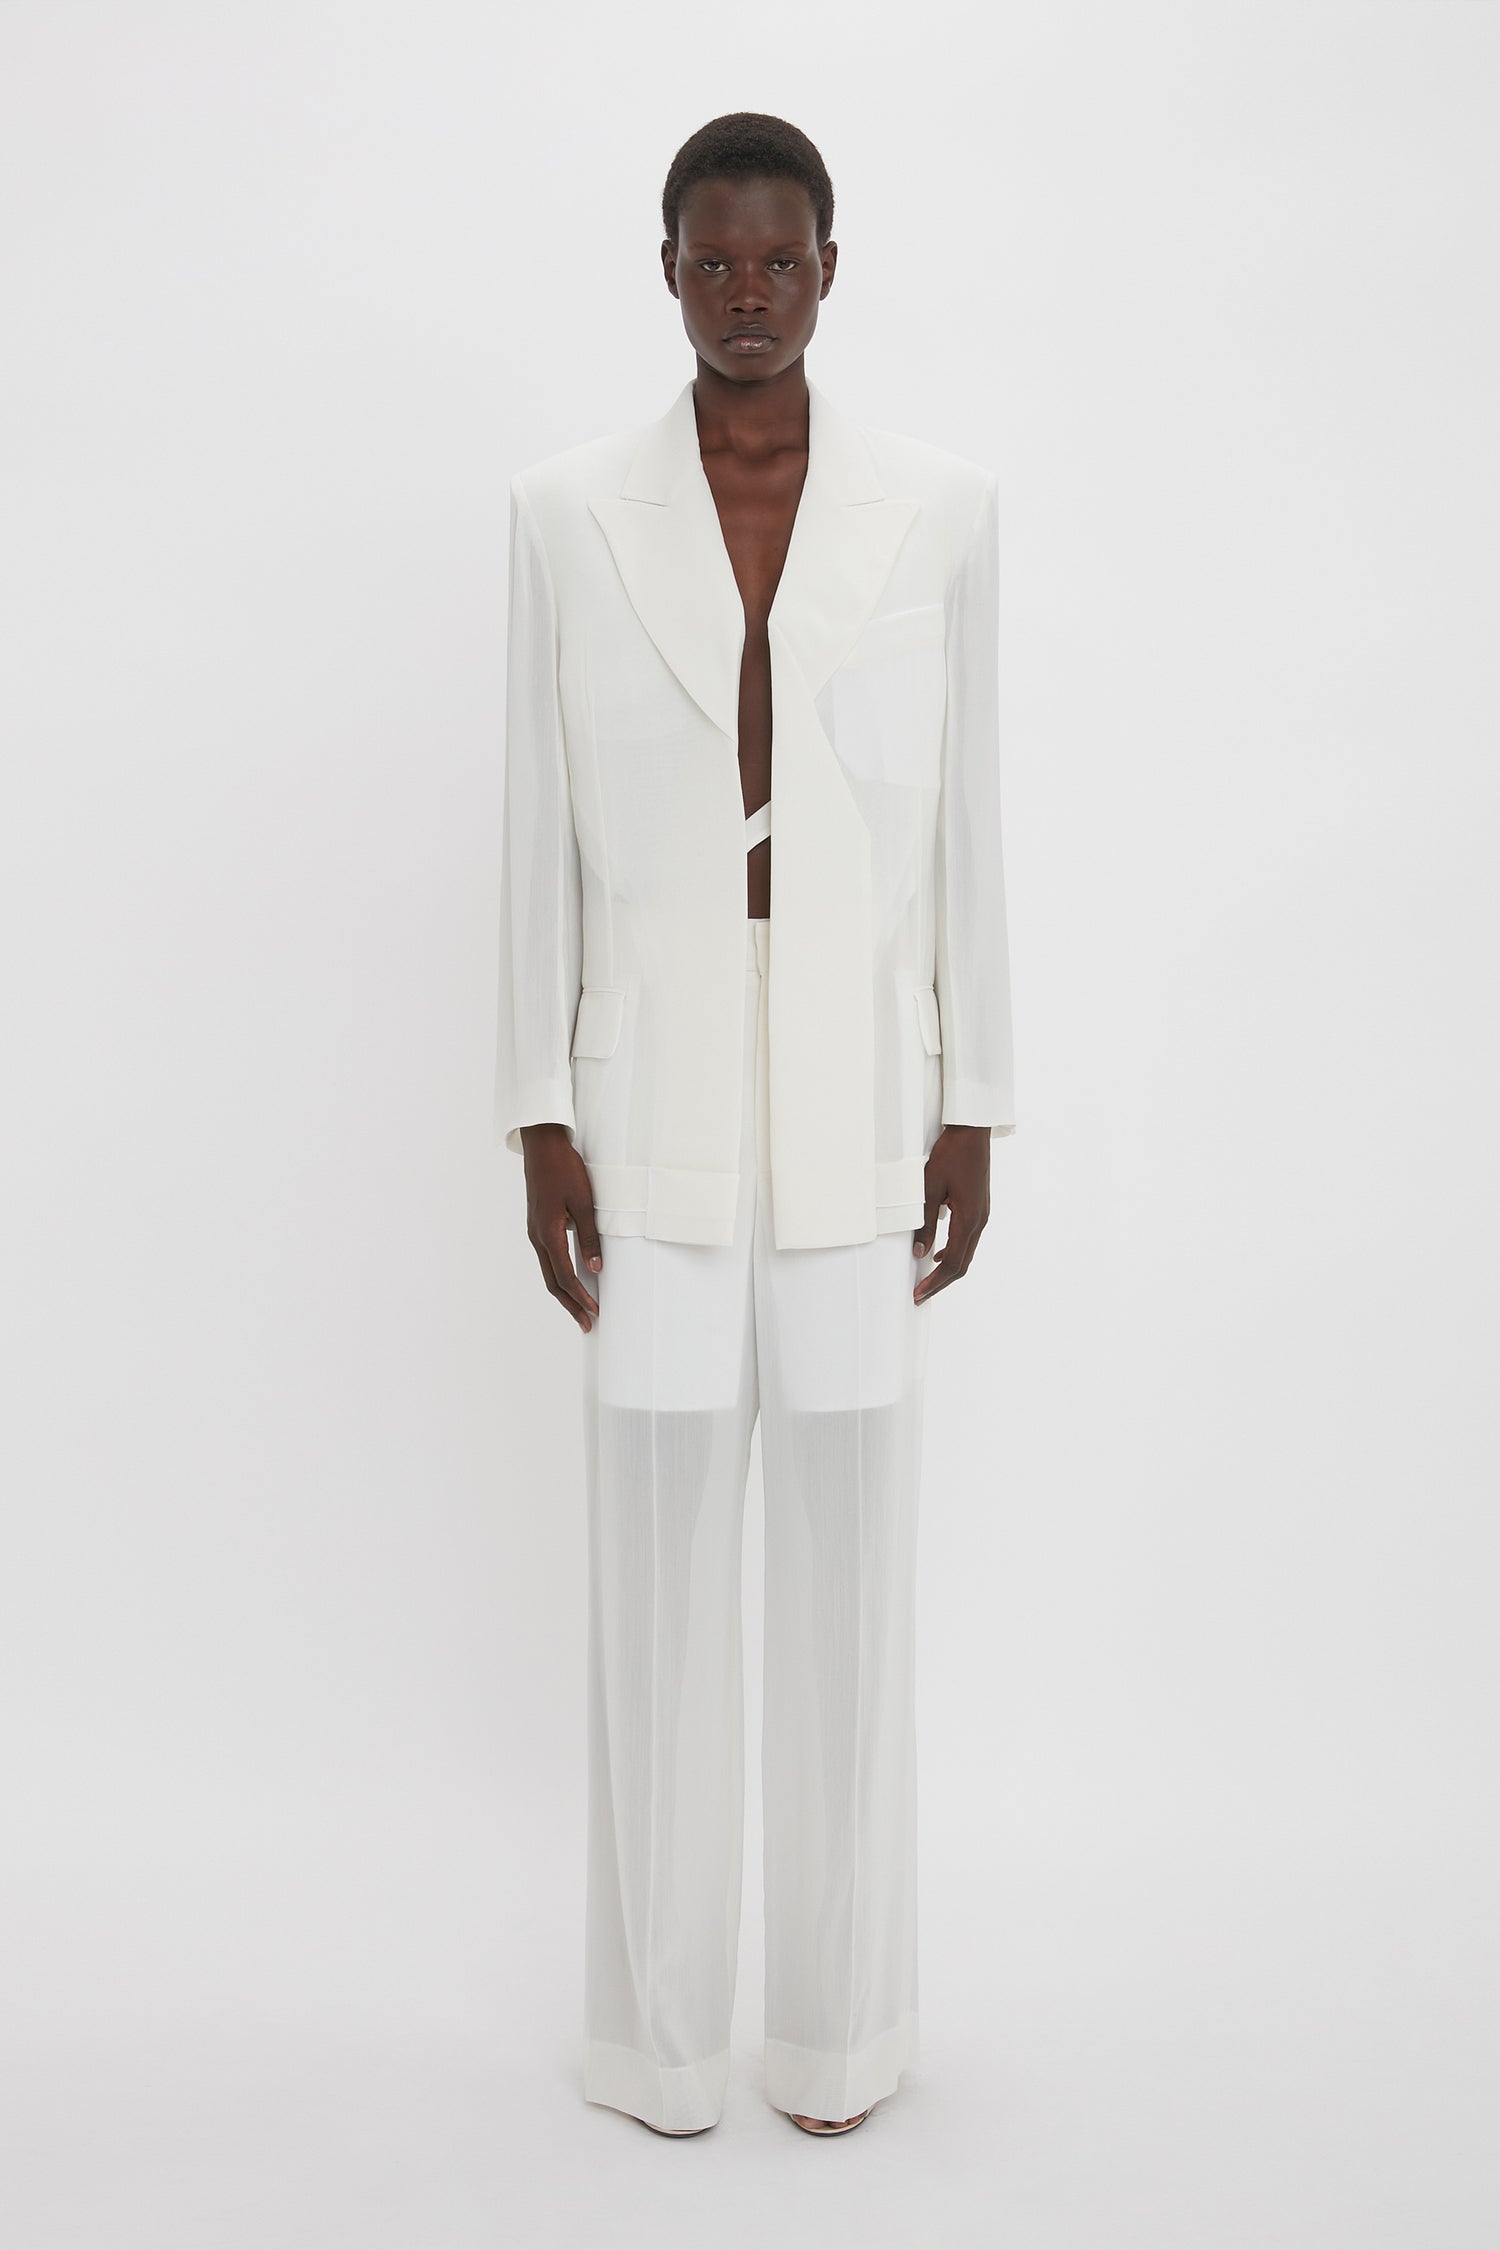 Person standing and facing forward, wearing a Victoria Beckham Fold Detail Tailored Jacket In White with matching pants made from featherweight wool against a plain white background.